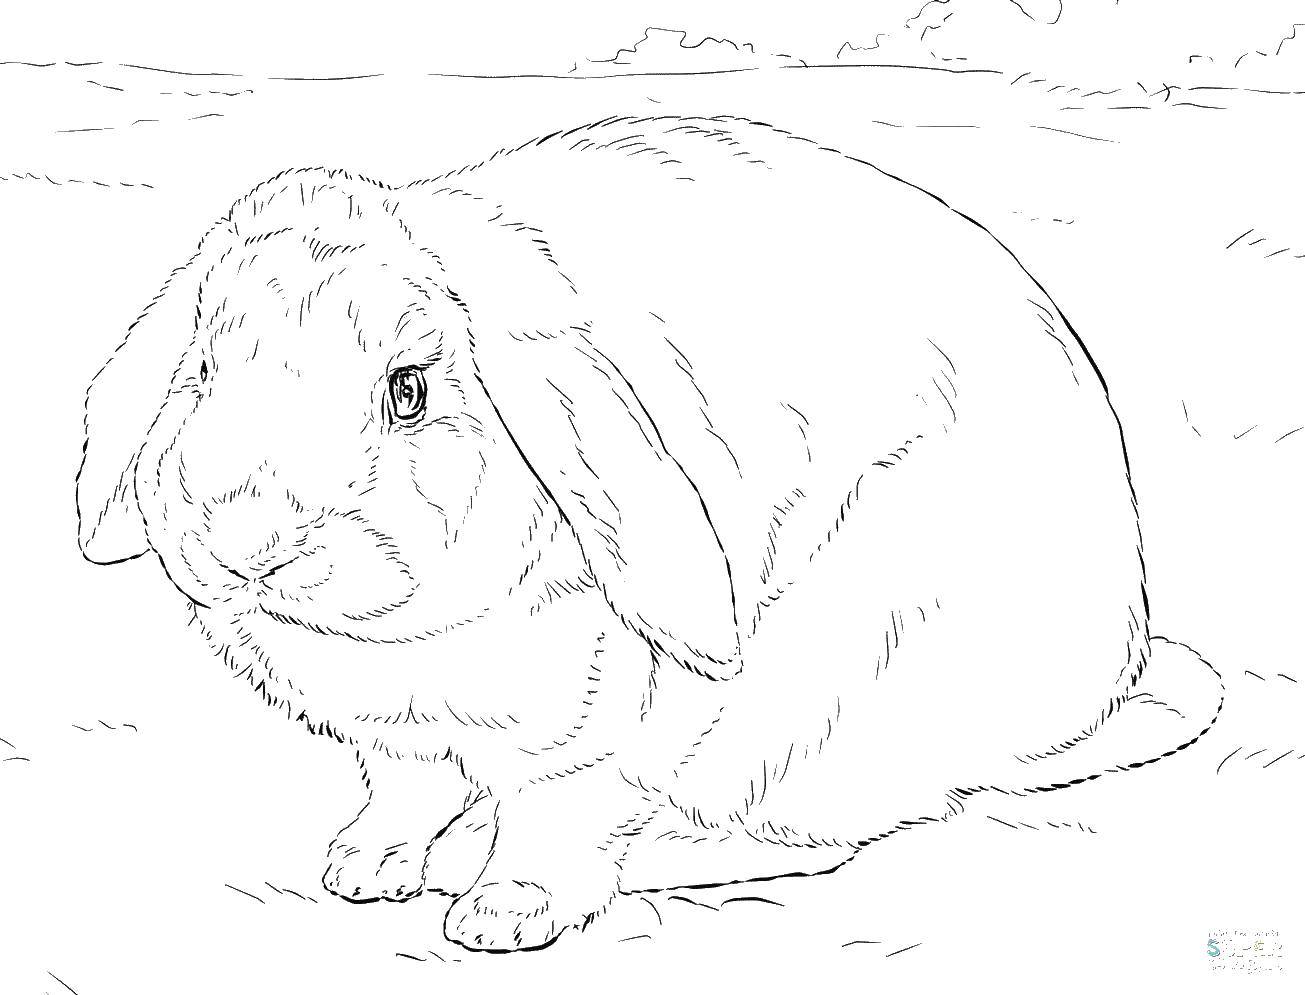 Coloring Chubby Bunny. Category Animals. Tags:  Animals, Bunny.